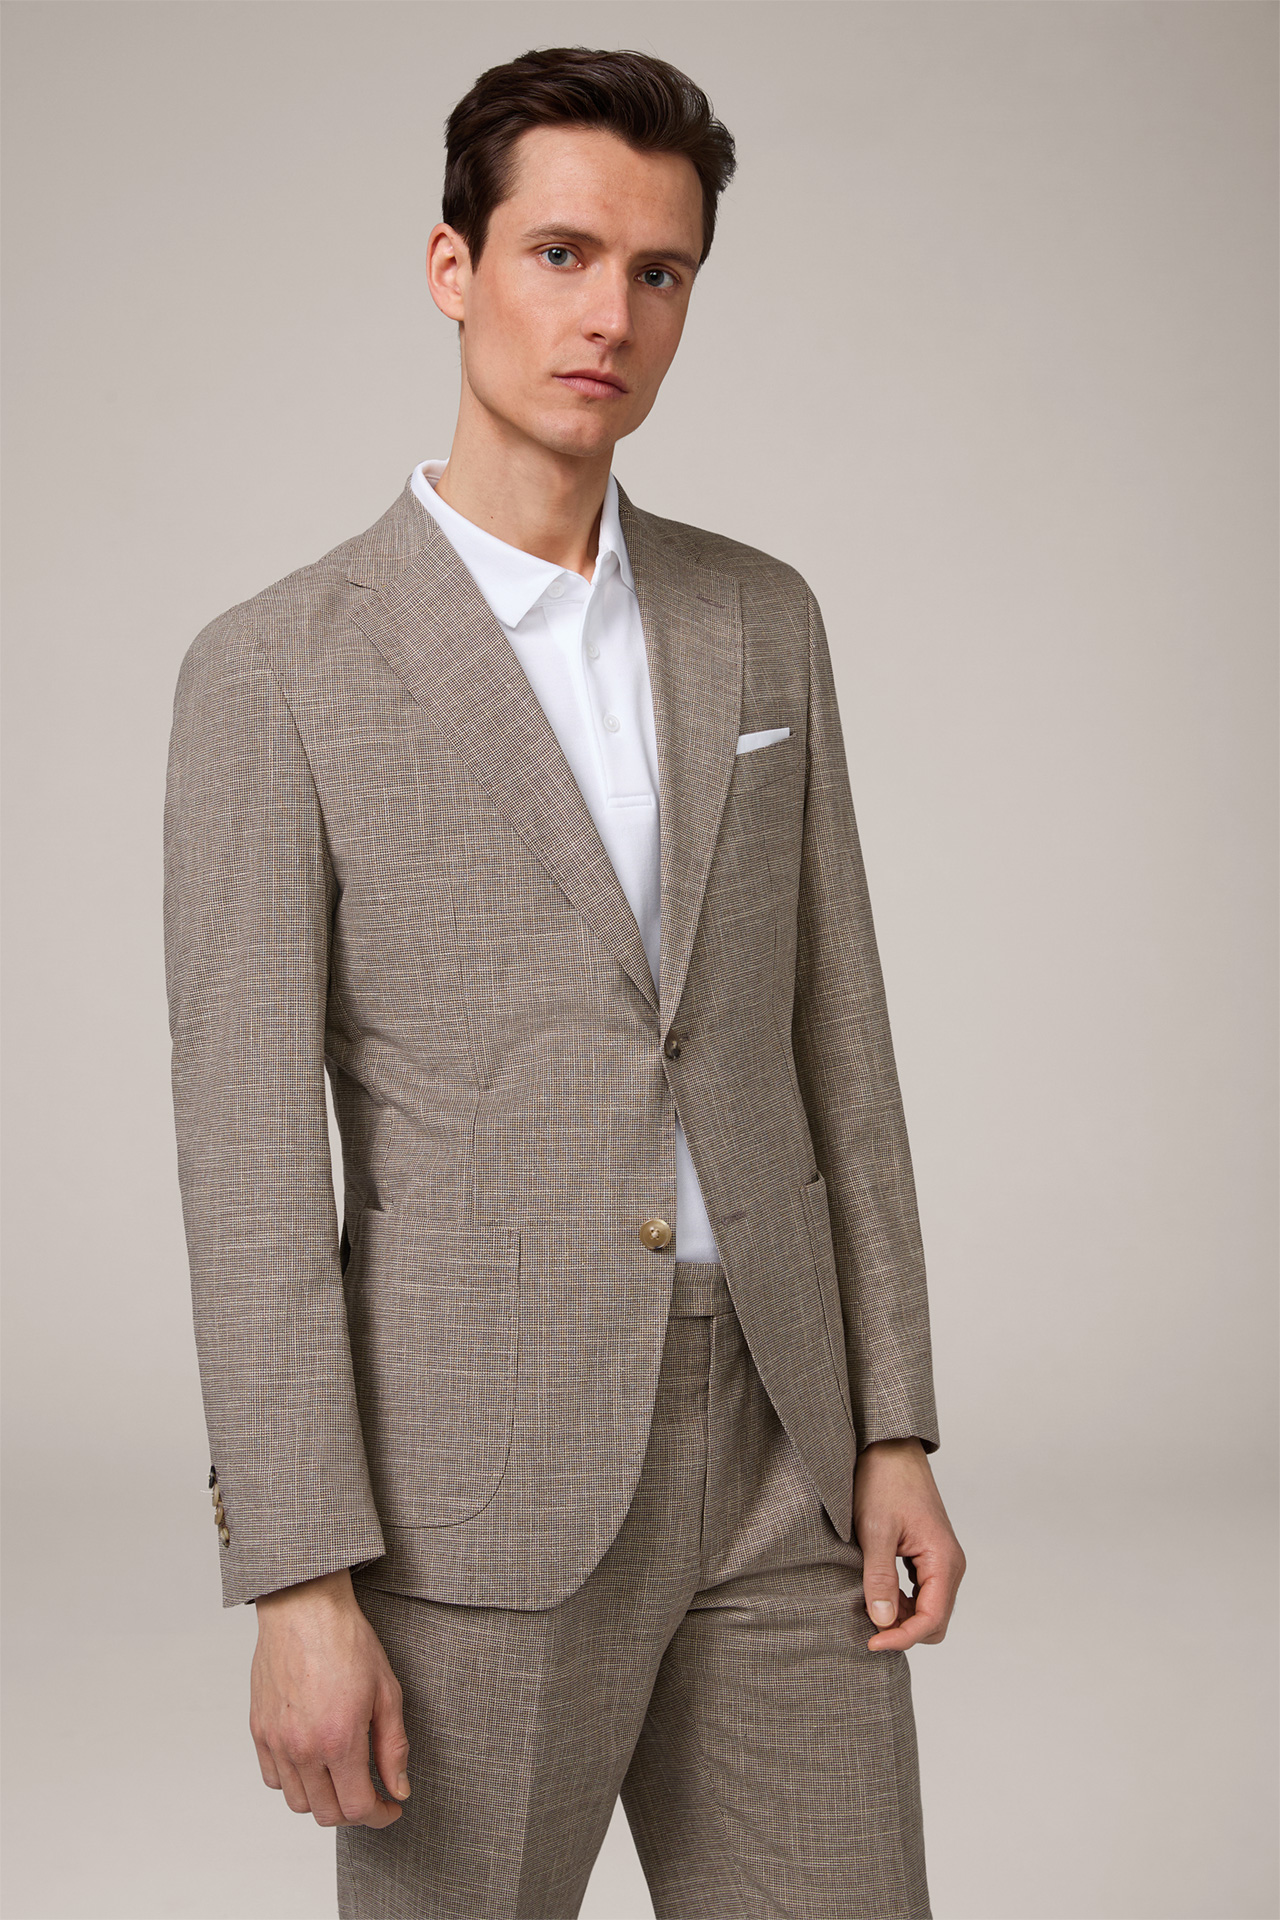 Giro Cotton Blend Modular Jacket with Wool and Linen in Brown and Beige Patterned